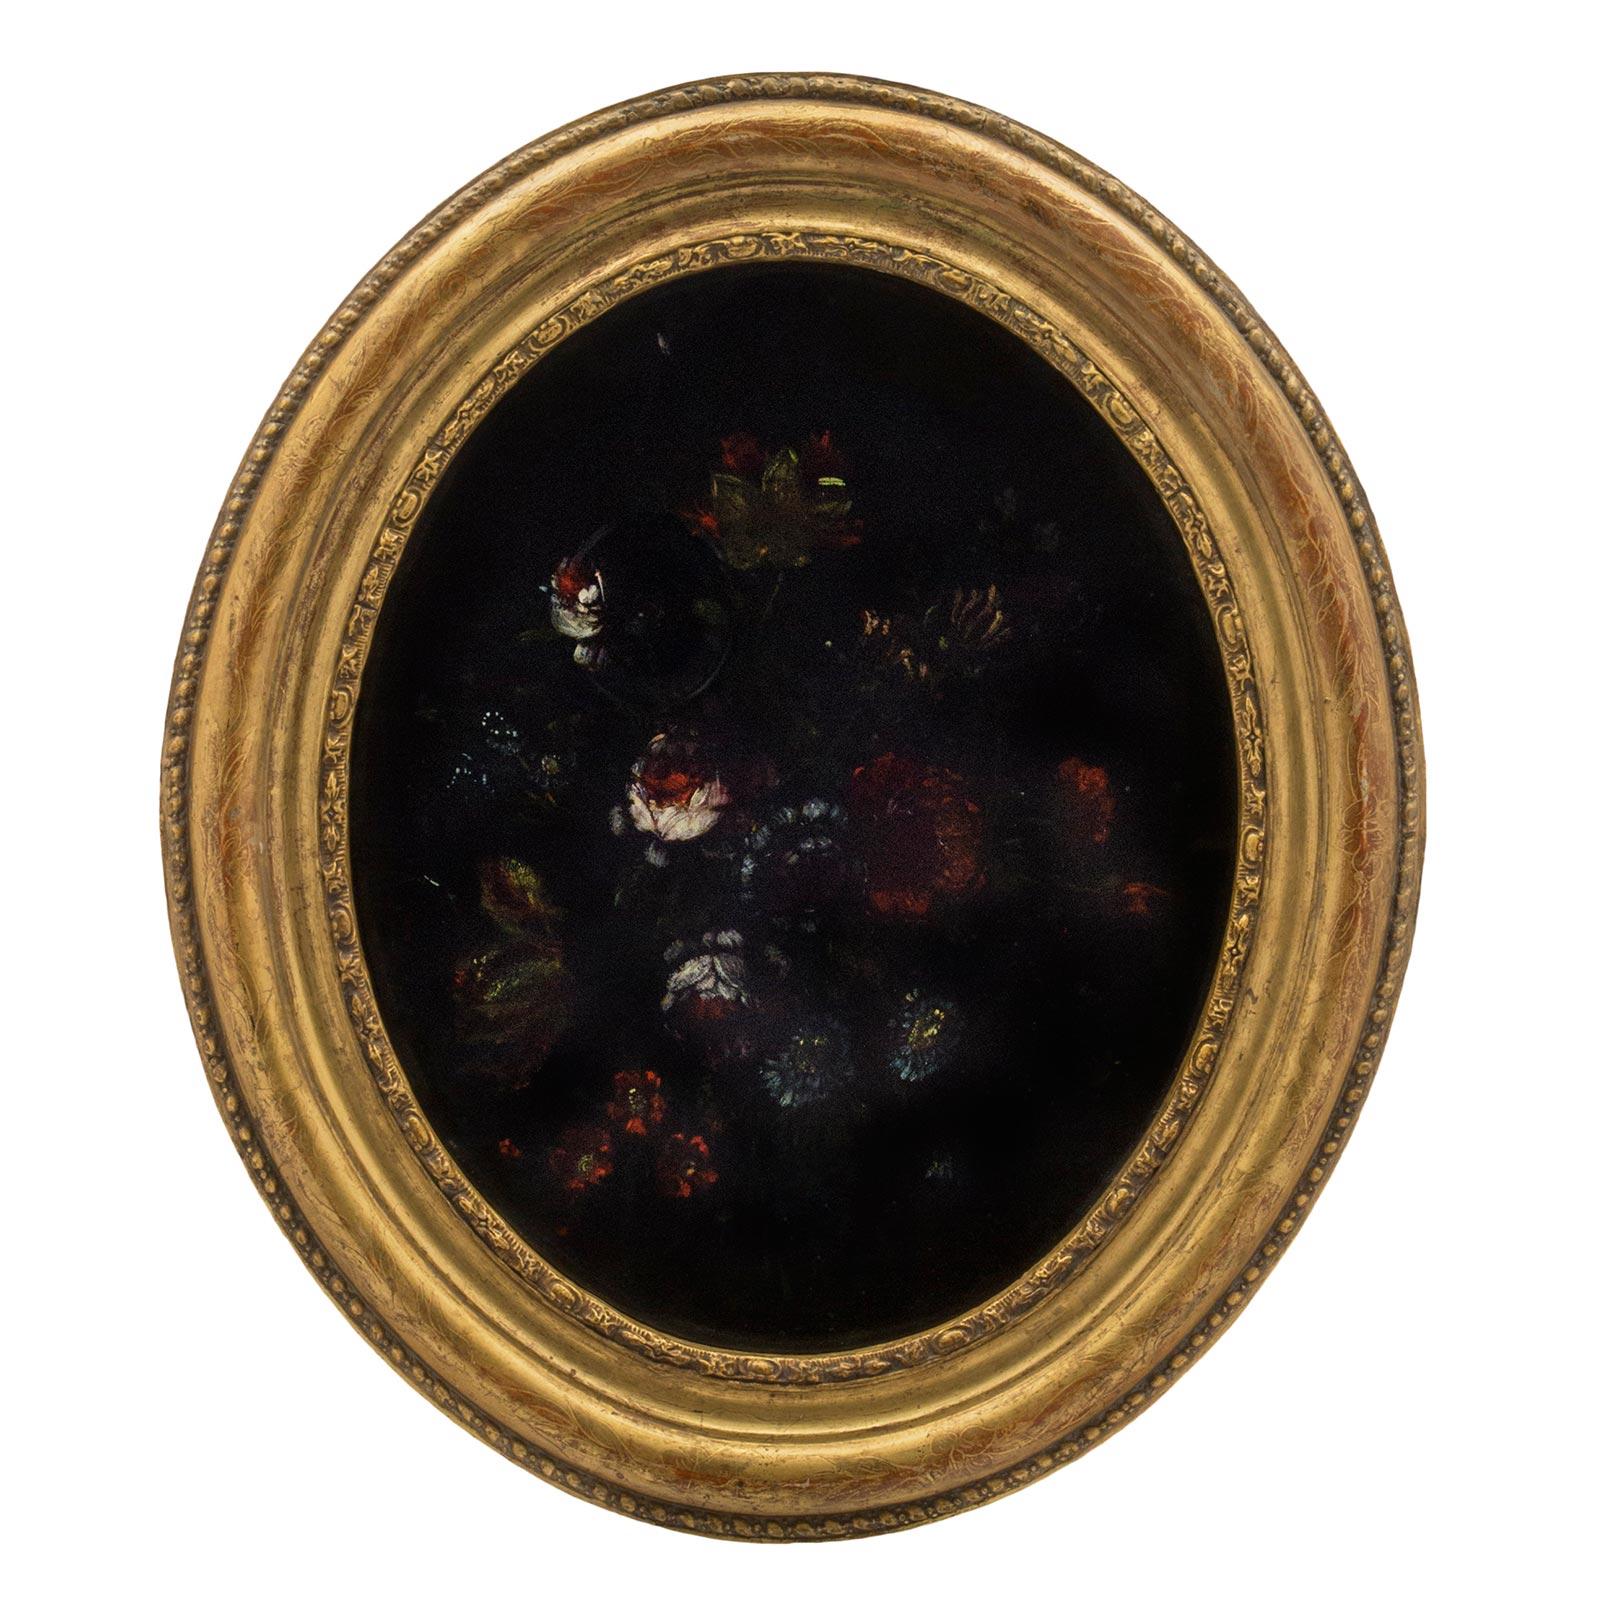 A wonderful pair of decorative Italian 19th century Louis XVI st. oval reverse painted on glass still lifes. The pair are framed within giltwood frames with a mottled floral etched design with an outer and inner beaded trim. Each still life is a